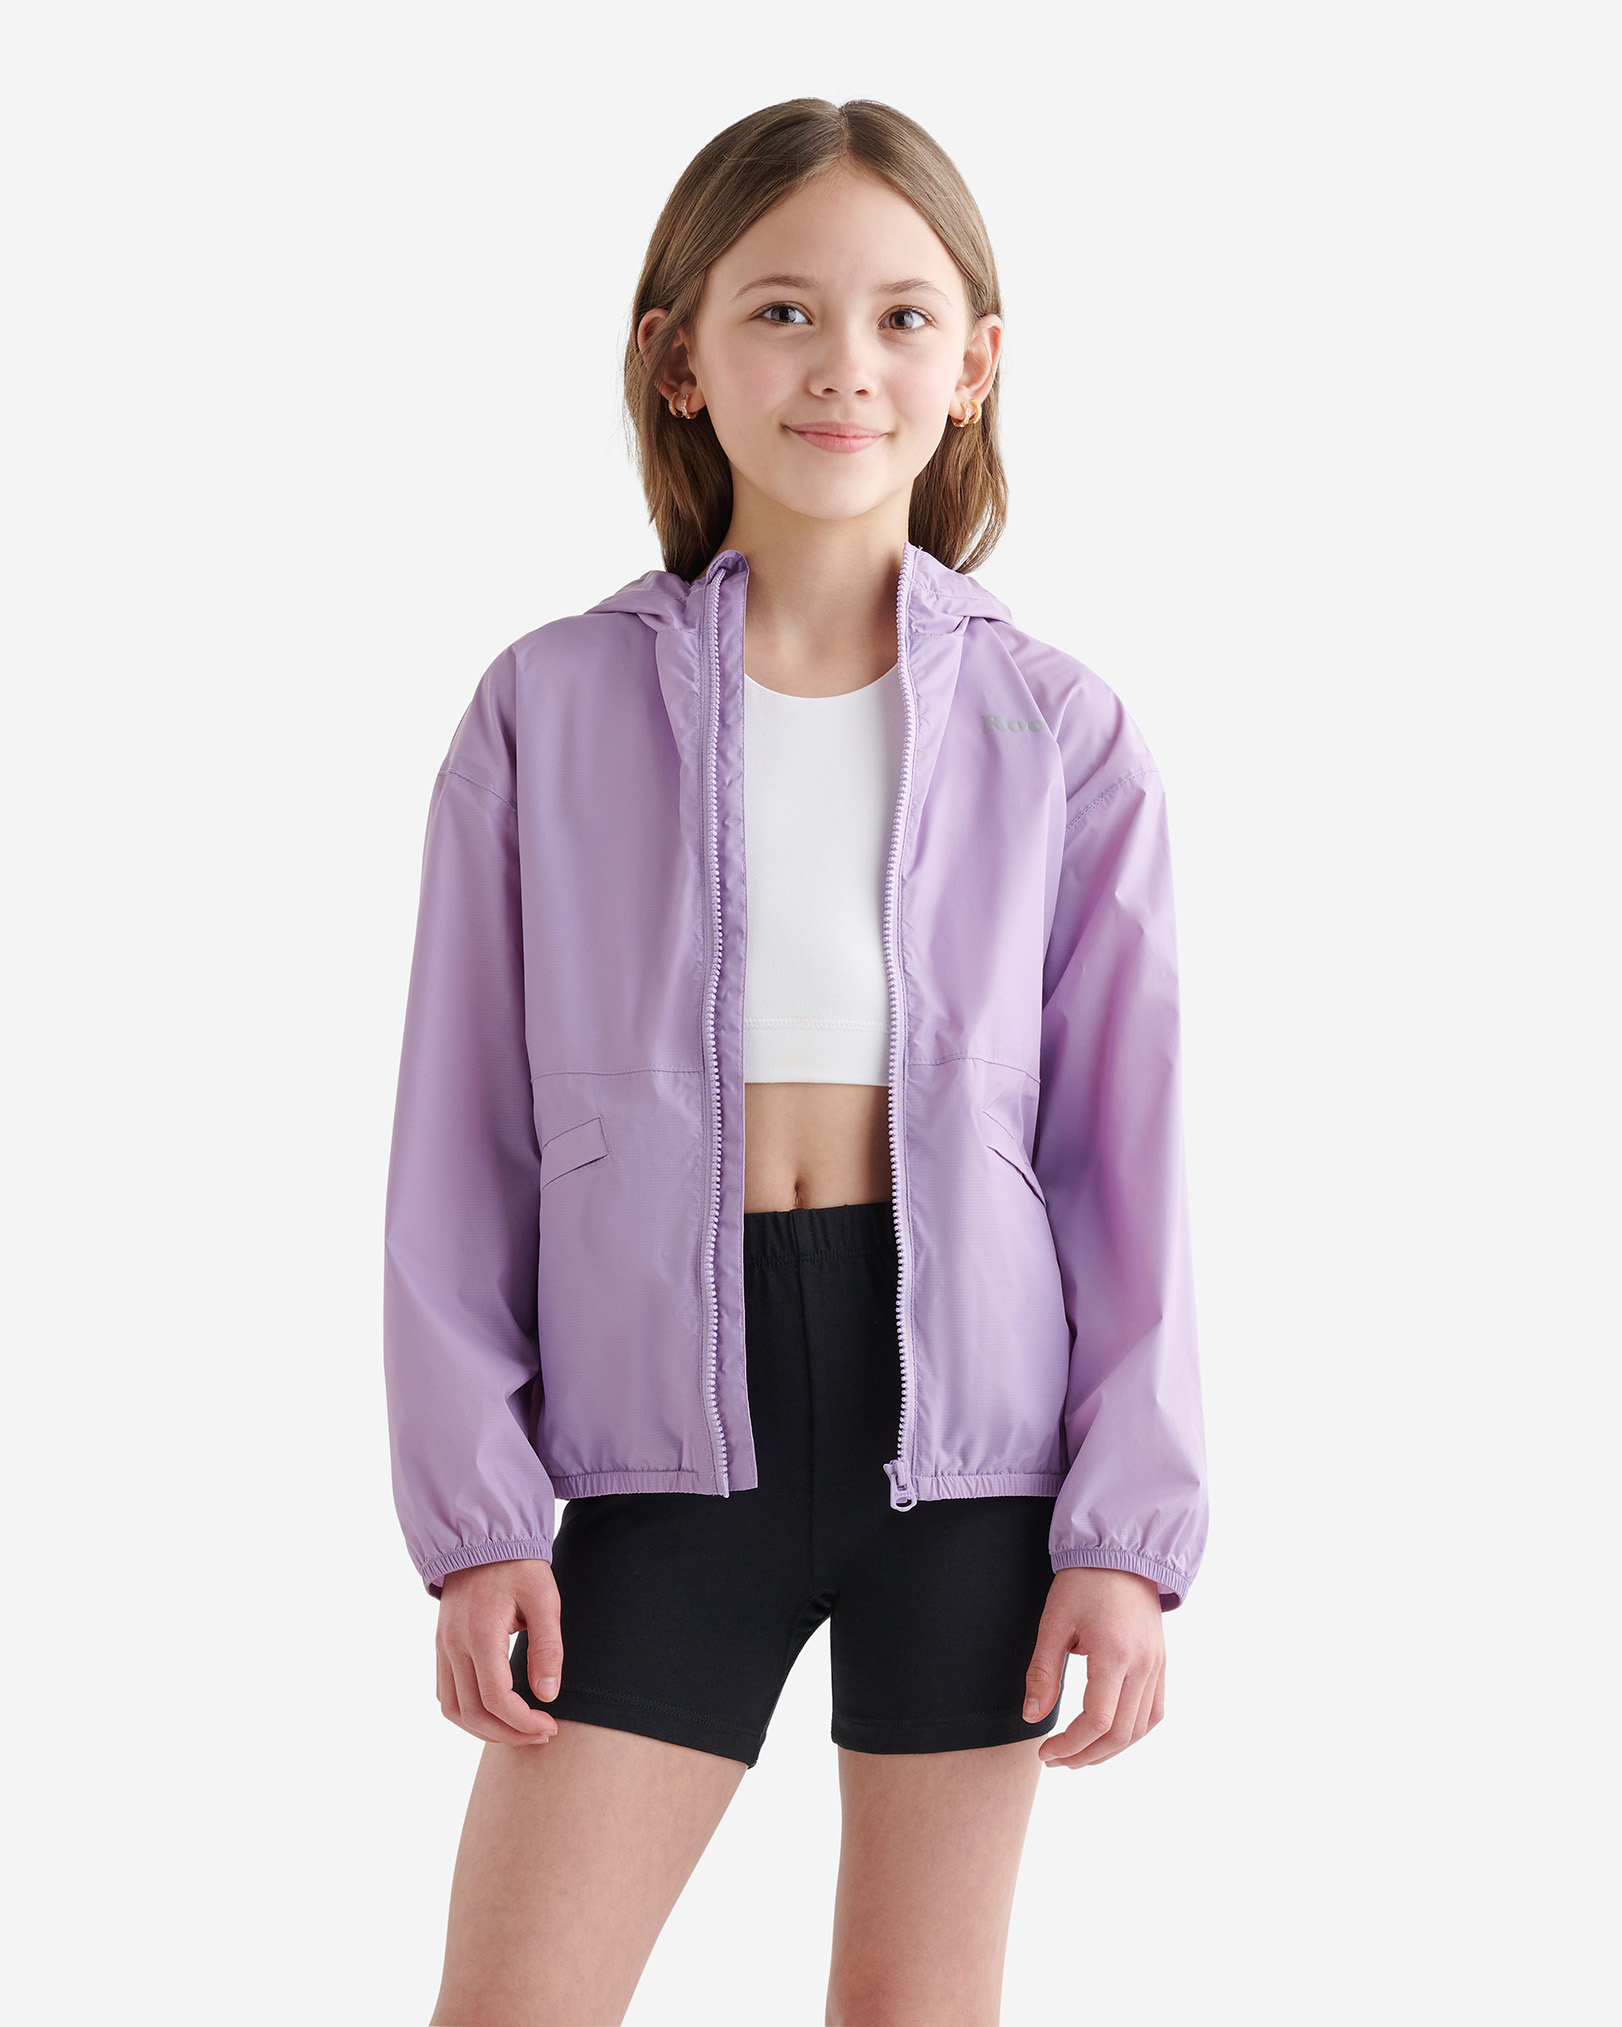 Roots Kids Packable Camp Jacket in Lilac Sky